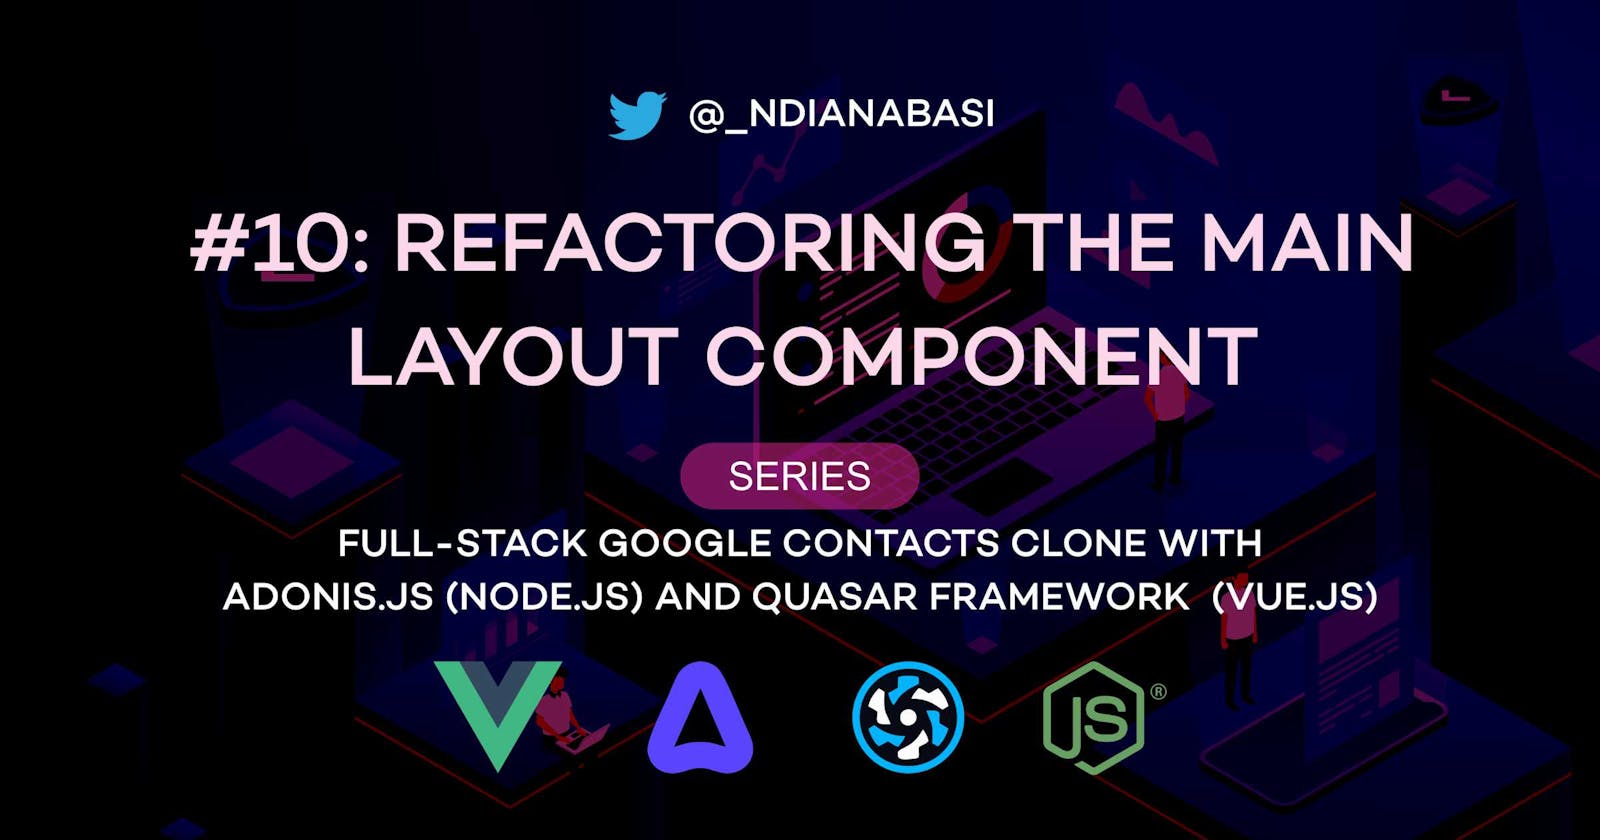 Refactoring the Main Layout | Full-Stack Google Contacts Clone with Adonis.js/Node.js and Quasar (Vue.js)